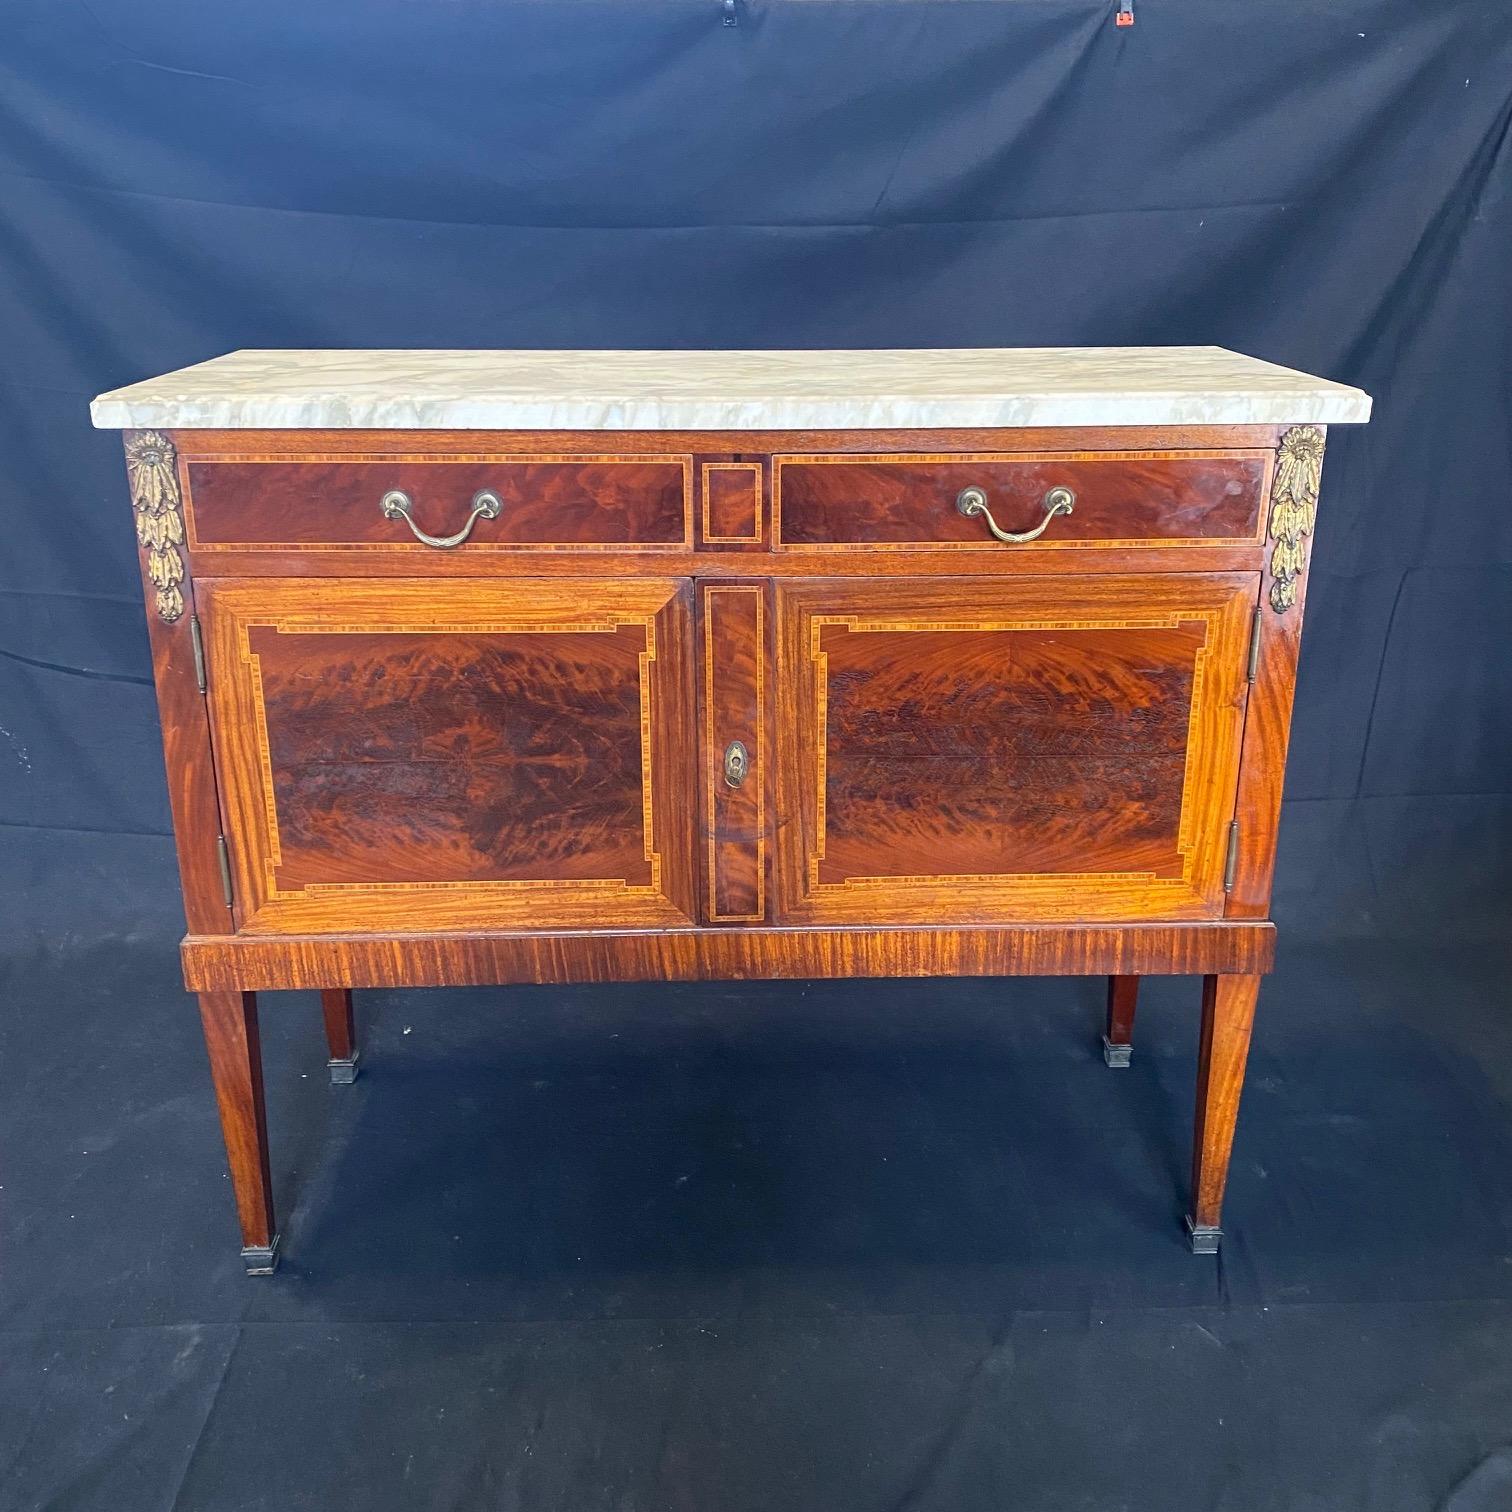 Antique French Louis XVI mahogany marble top buffet, sideboard or console with gilt bronze mounts represents the essence of the classical style celebrated especially during the latter years of the 19th century into present times. This buffet or